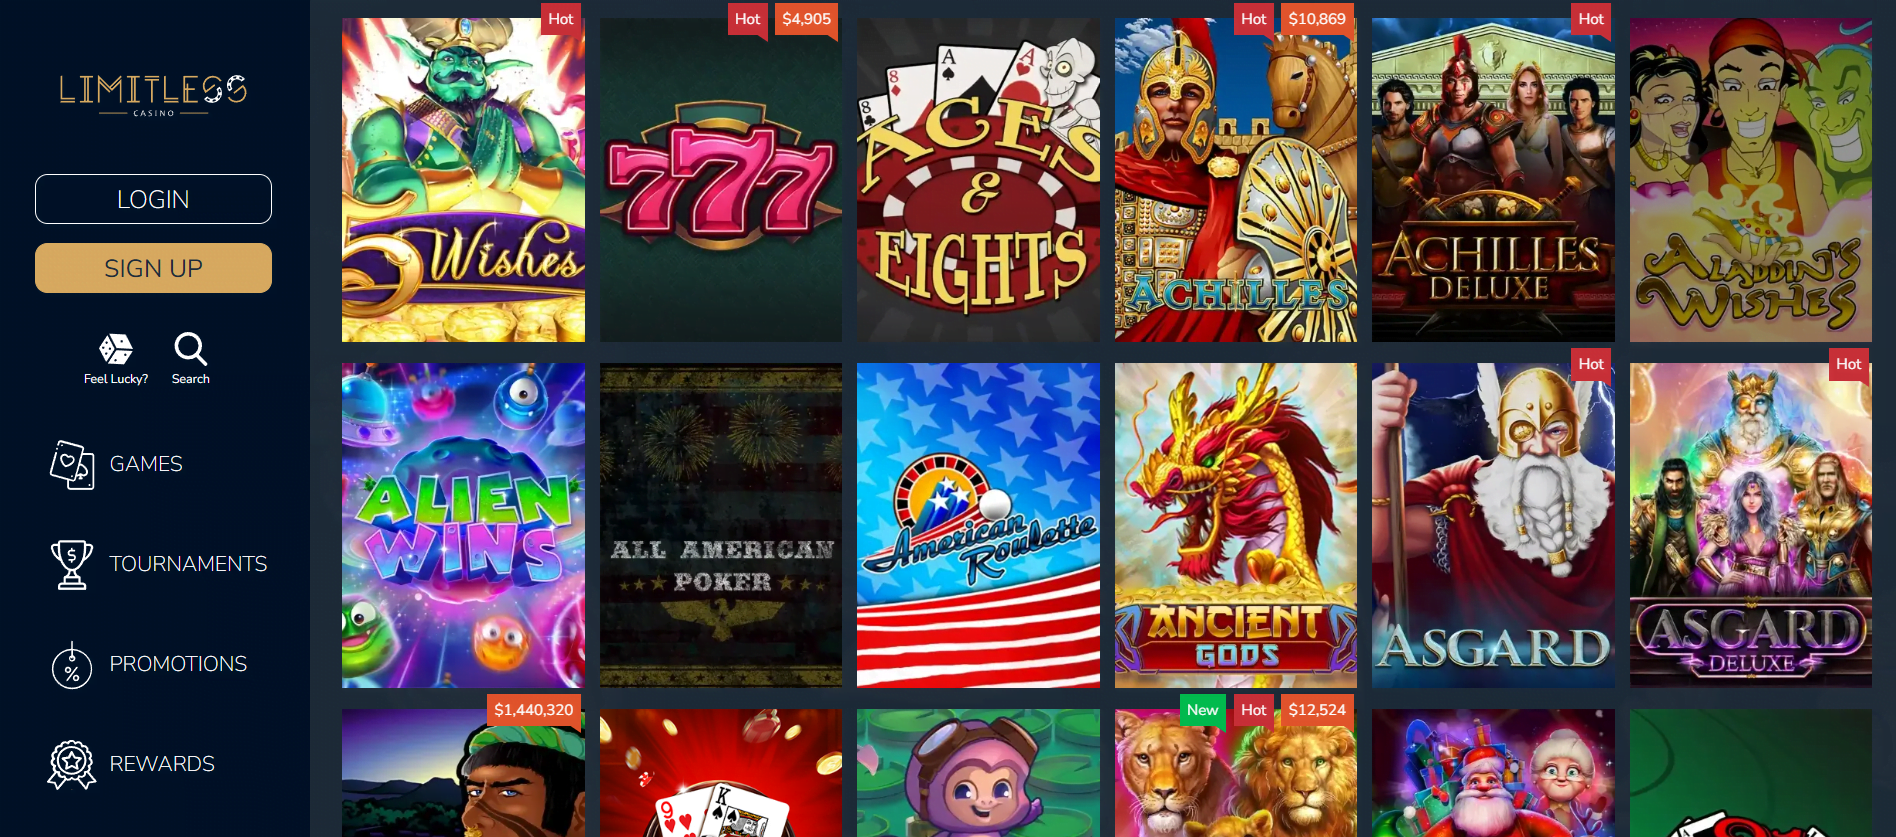 Online Limitless Casino Review 2023: Login, No Deposit Bonus Codes and Free Spins 8